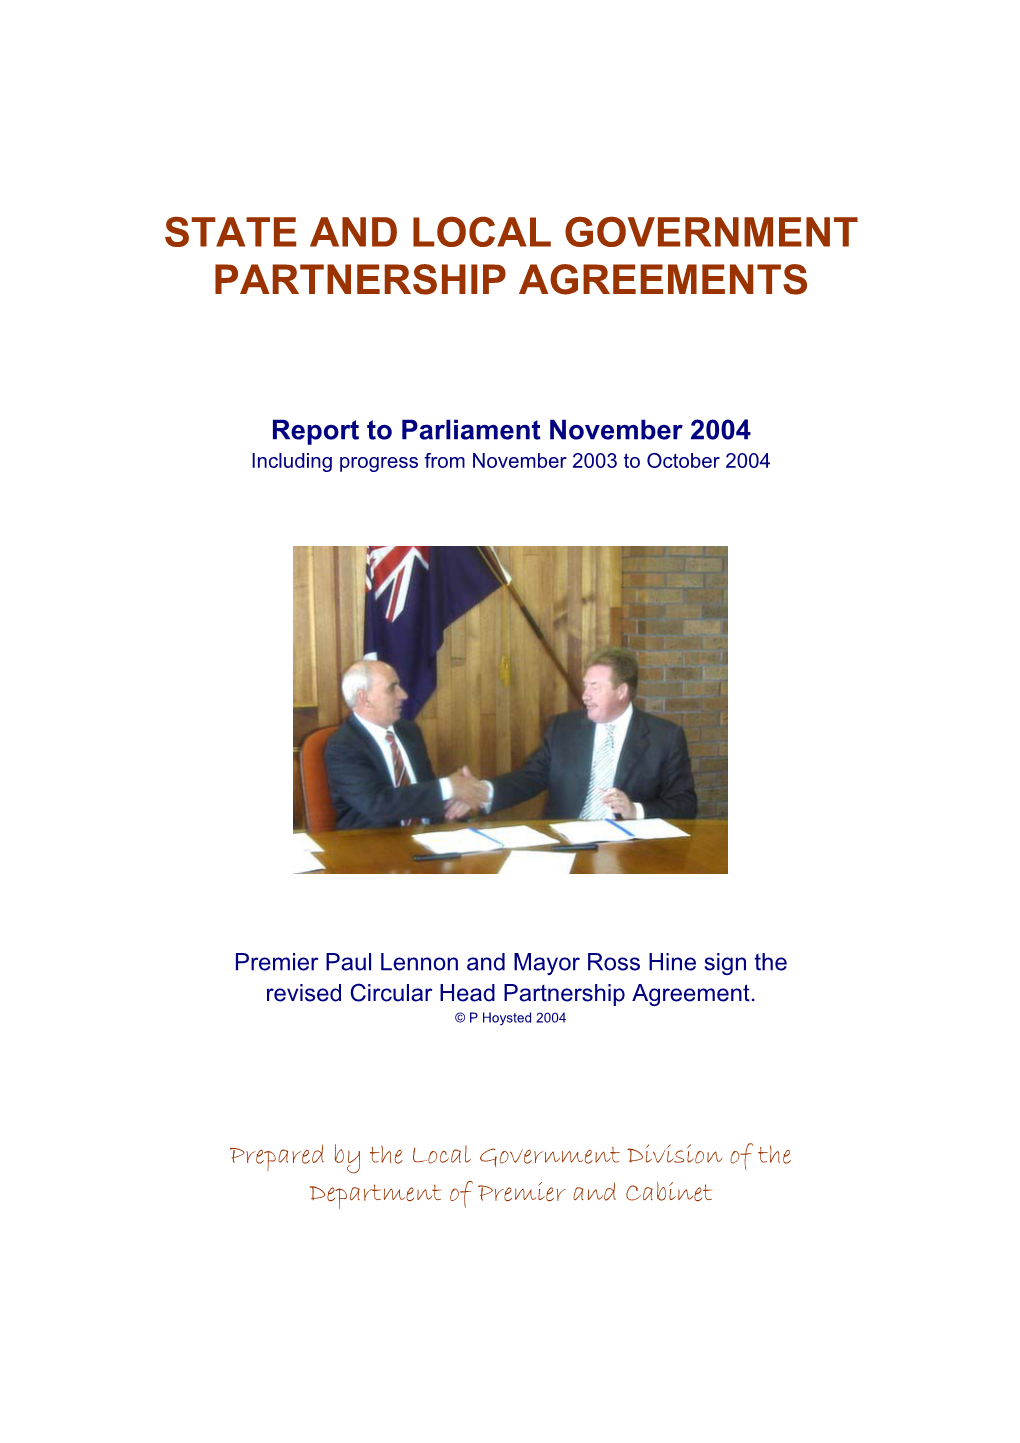 State and Local Government Partnership Agreements